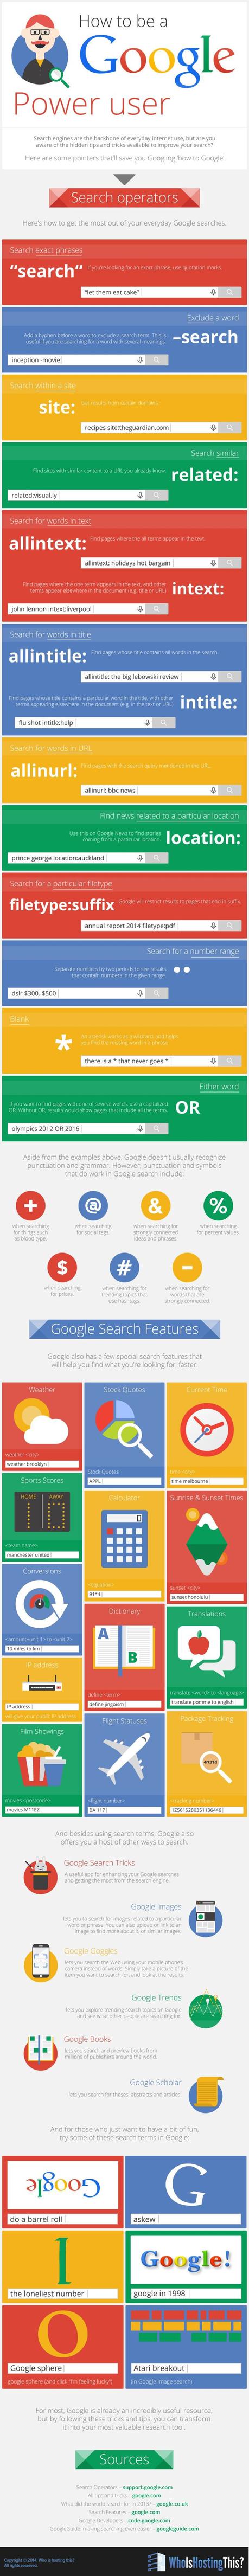 Google advanced searches infographic